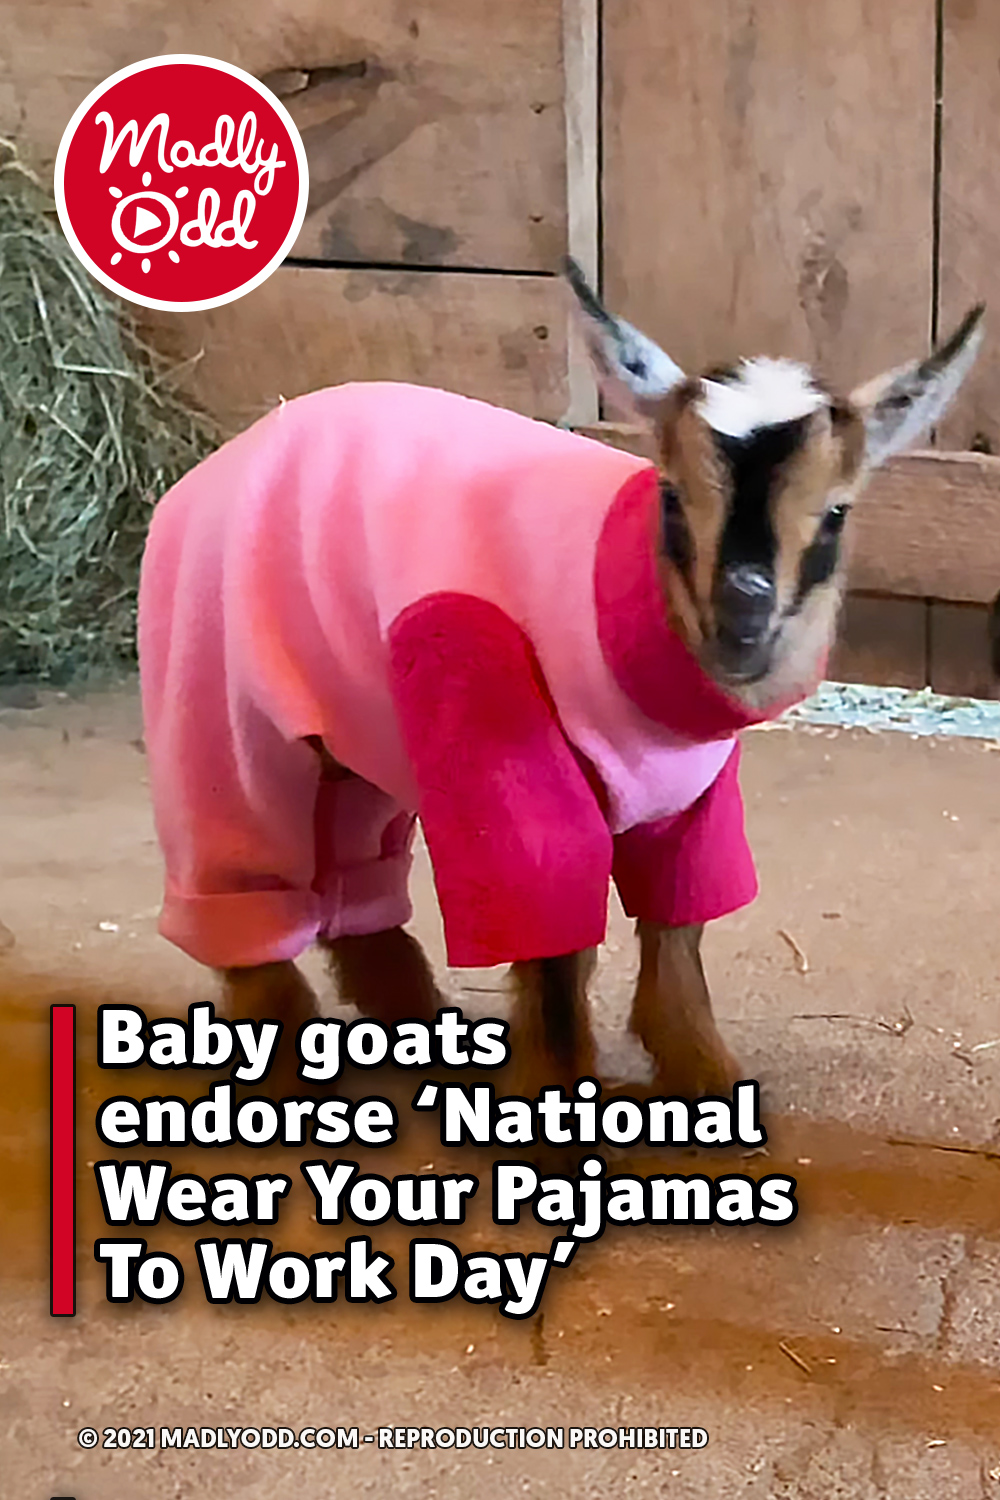 Baby goats endorse ‘National Wear Your Pajamas To Work Day’